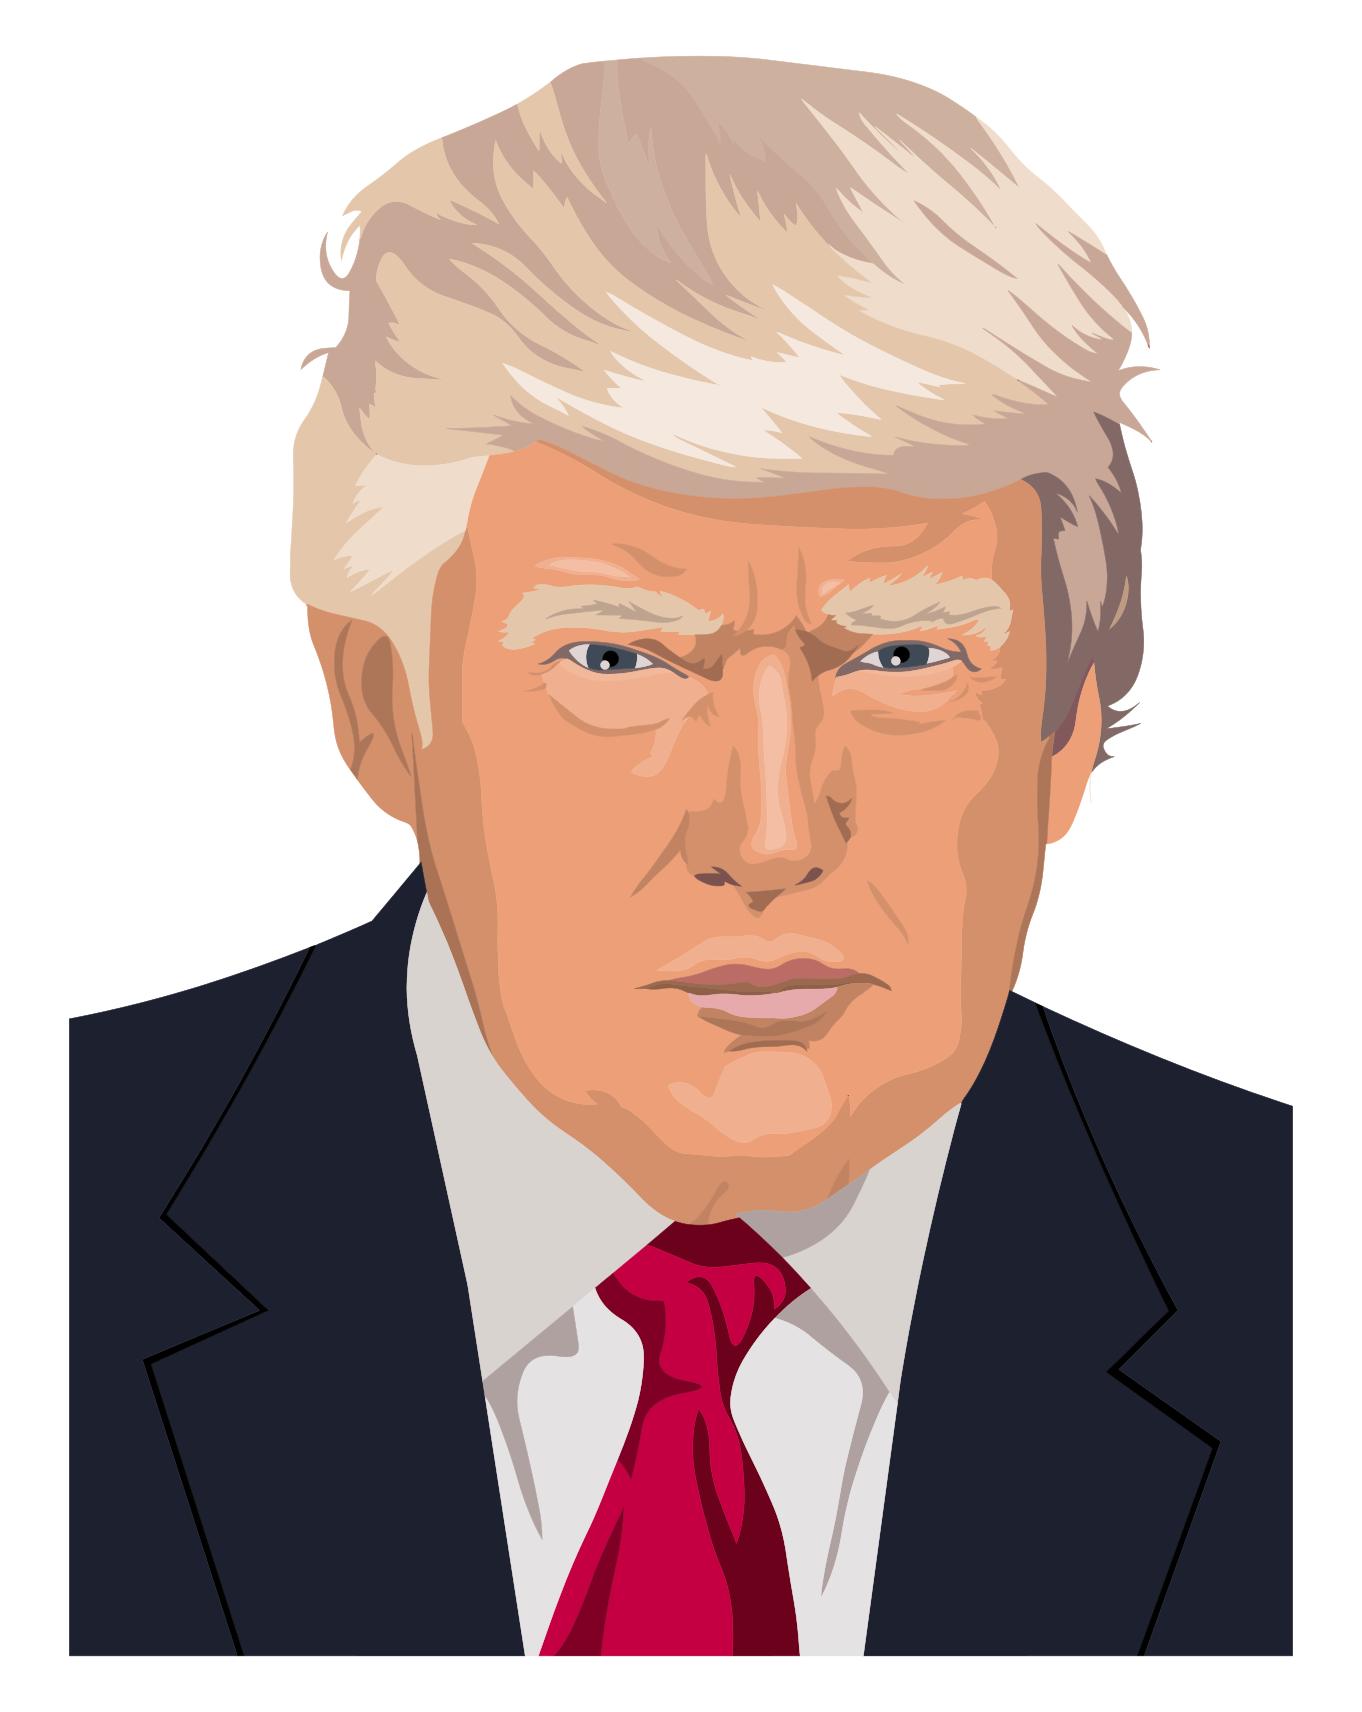 Donald Trump Clipart by andre